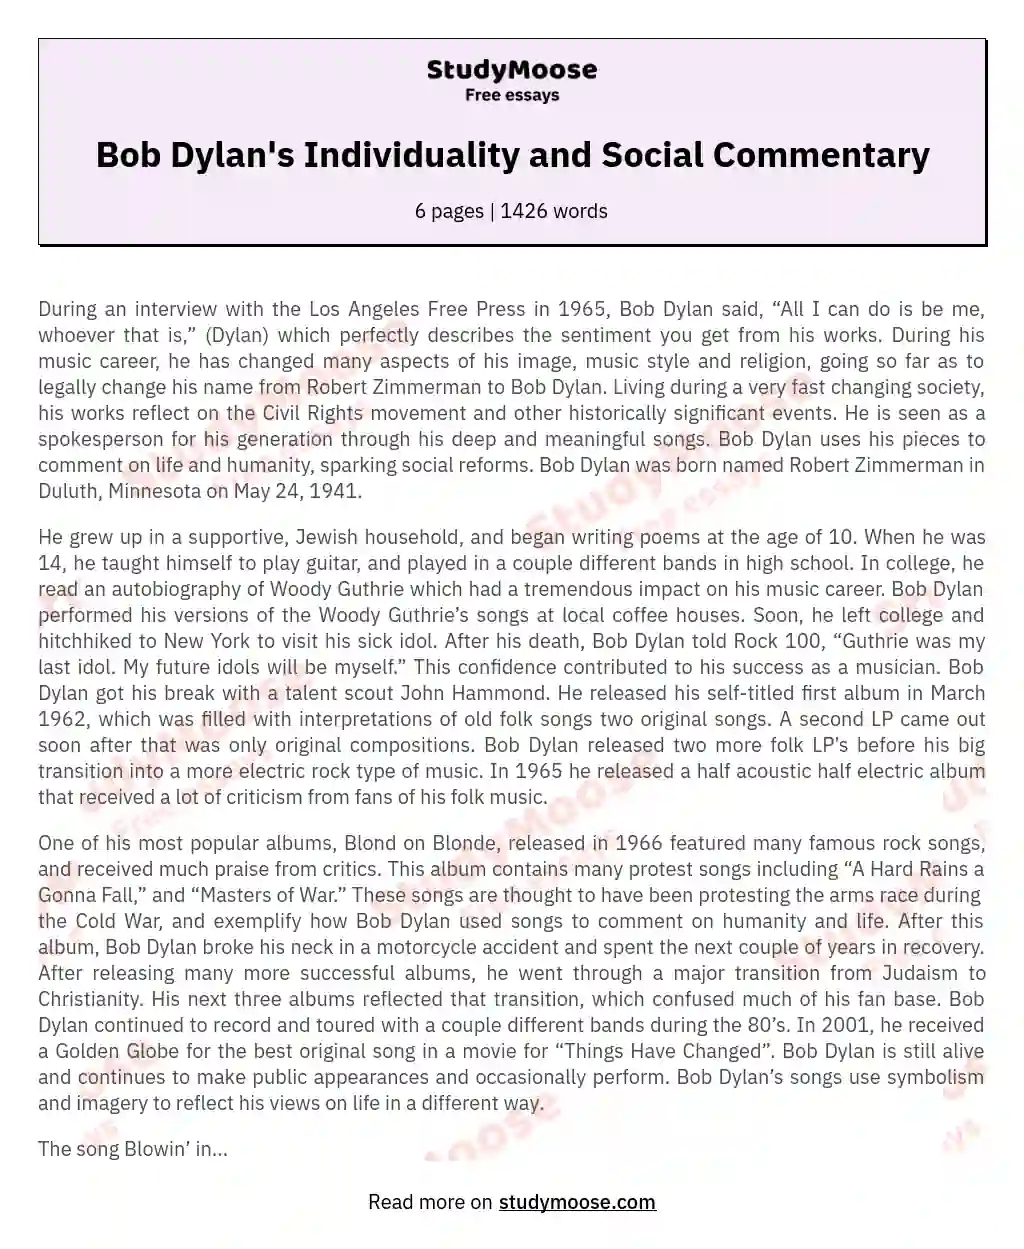 Bob Dylan's Individuality and Social Commentary